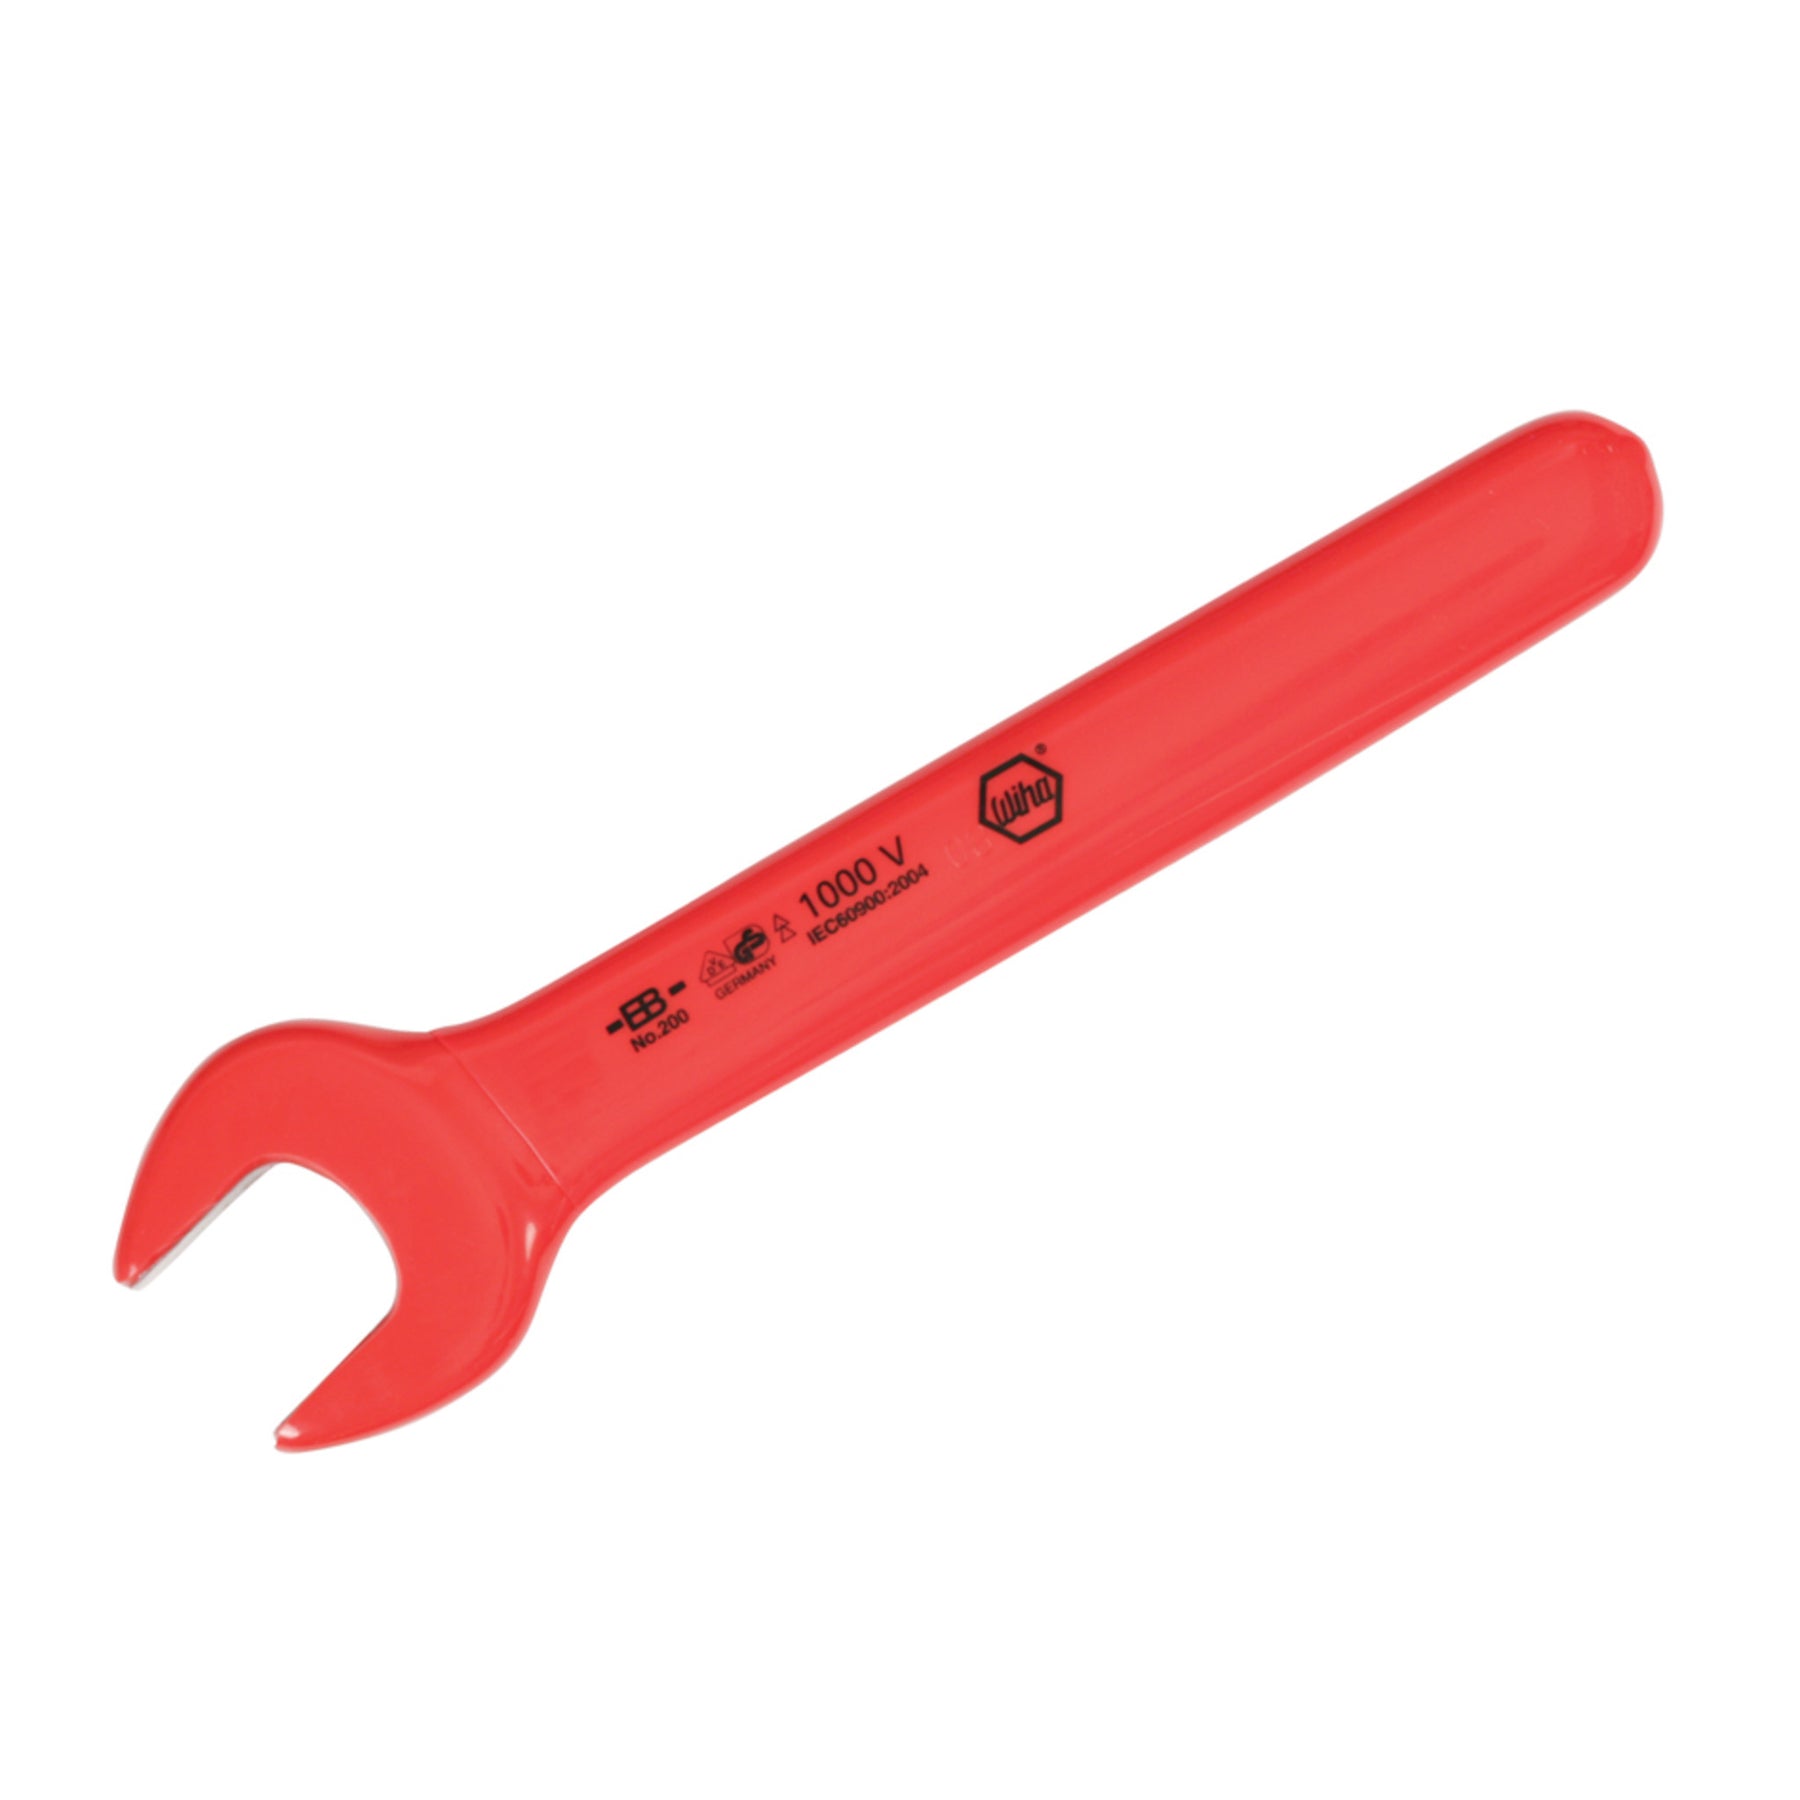 Wiha 20014 Insulated Open End Wrench 14.0mm